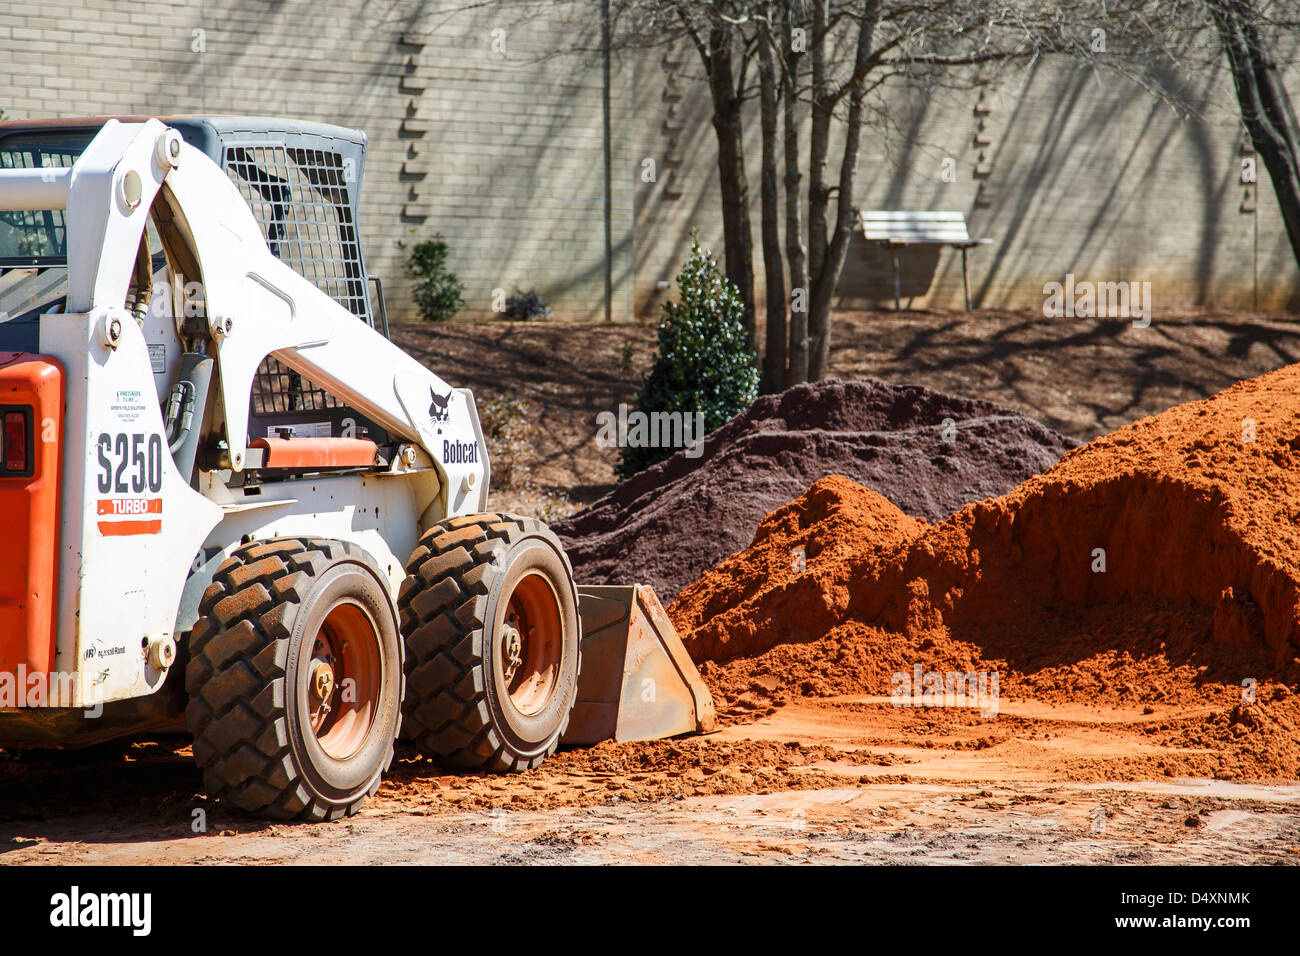 Small earth mover digging in pile of dirt at site Stock Photo